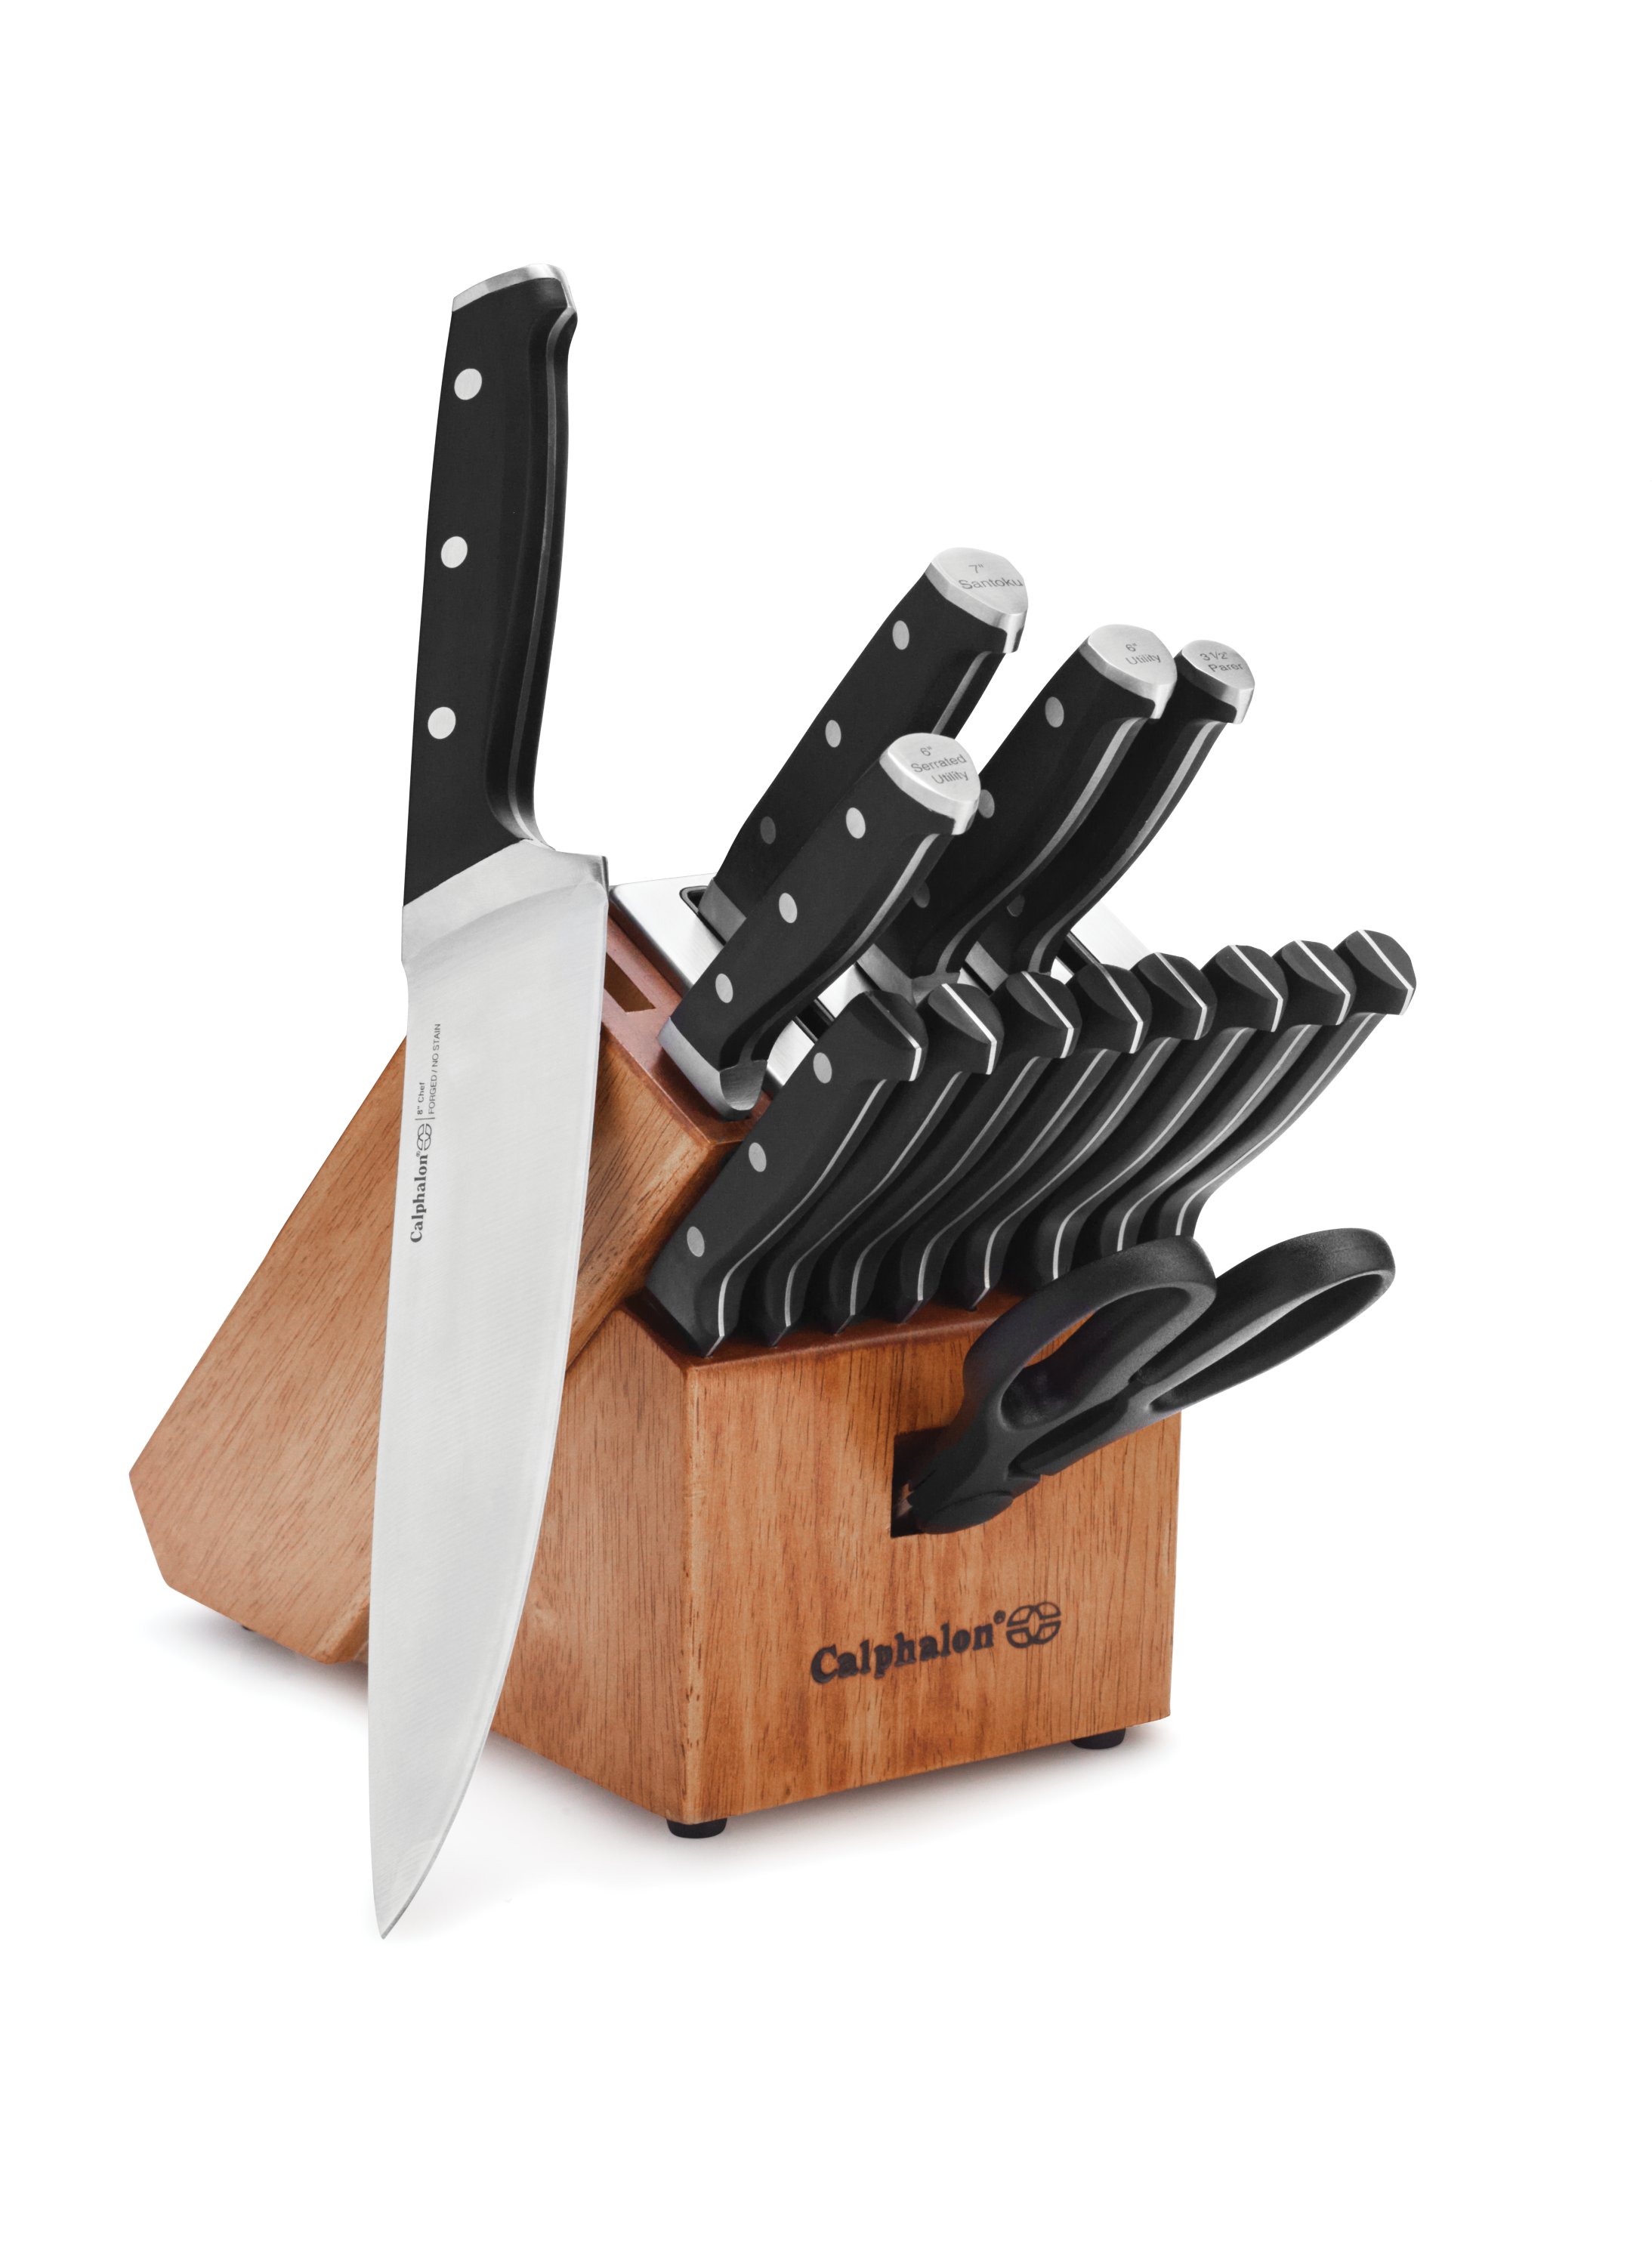 Revealed: All about Calphalon Contemporary Knives